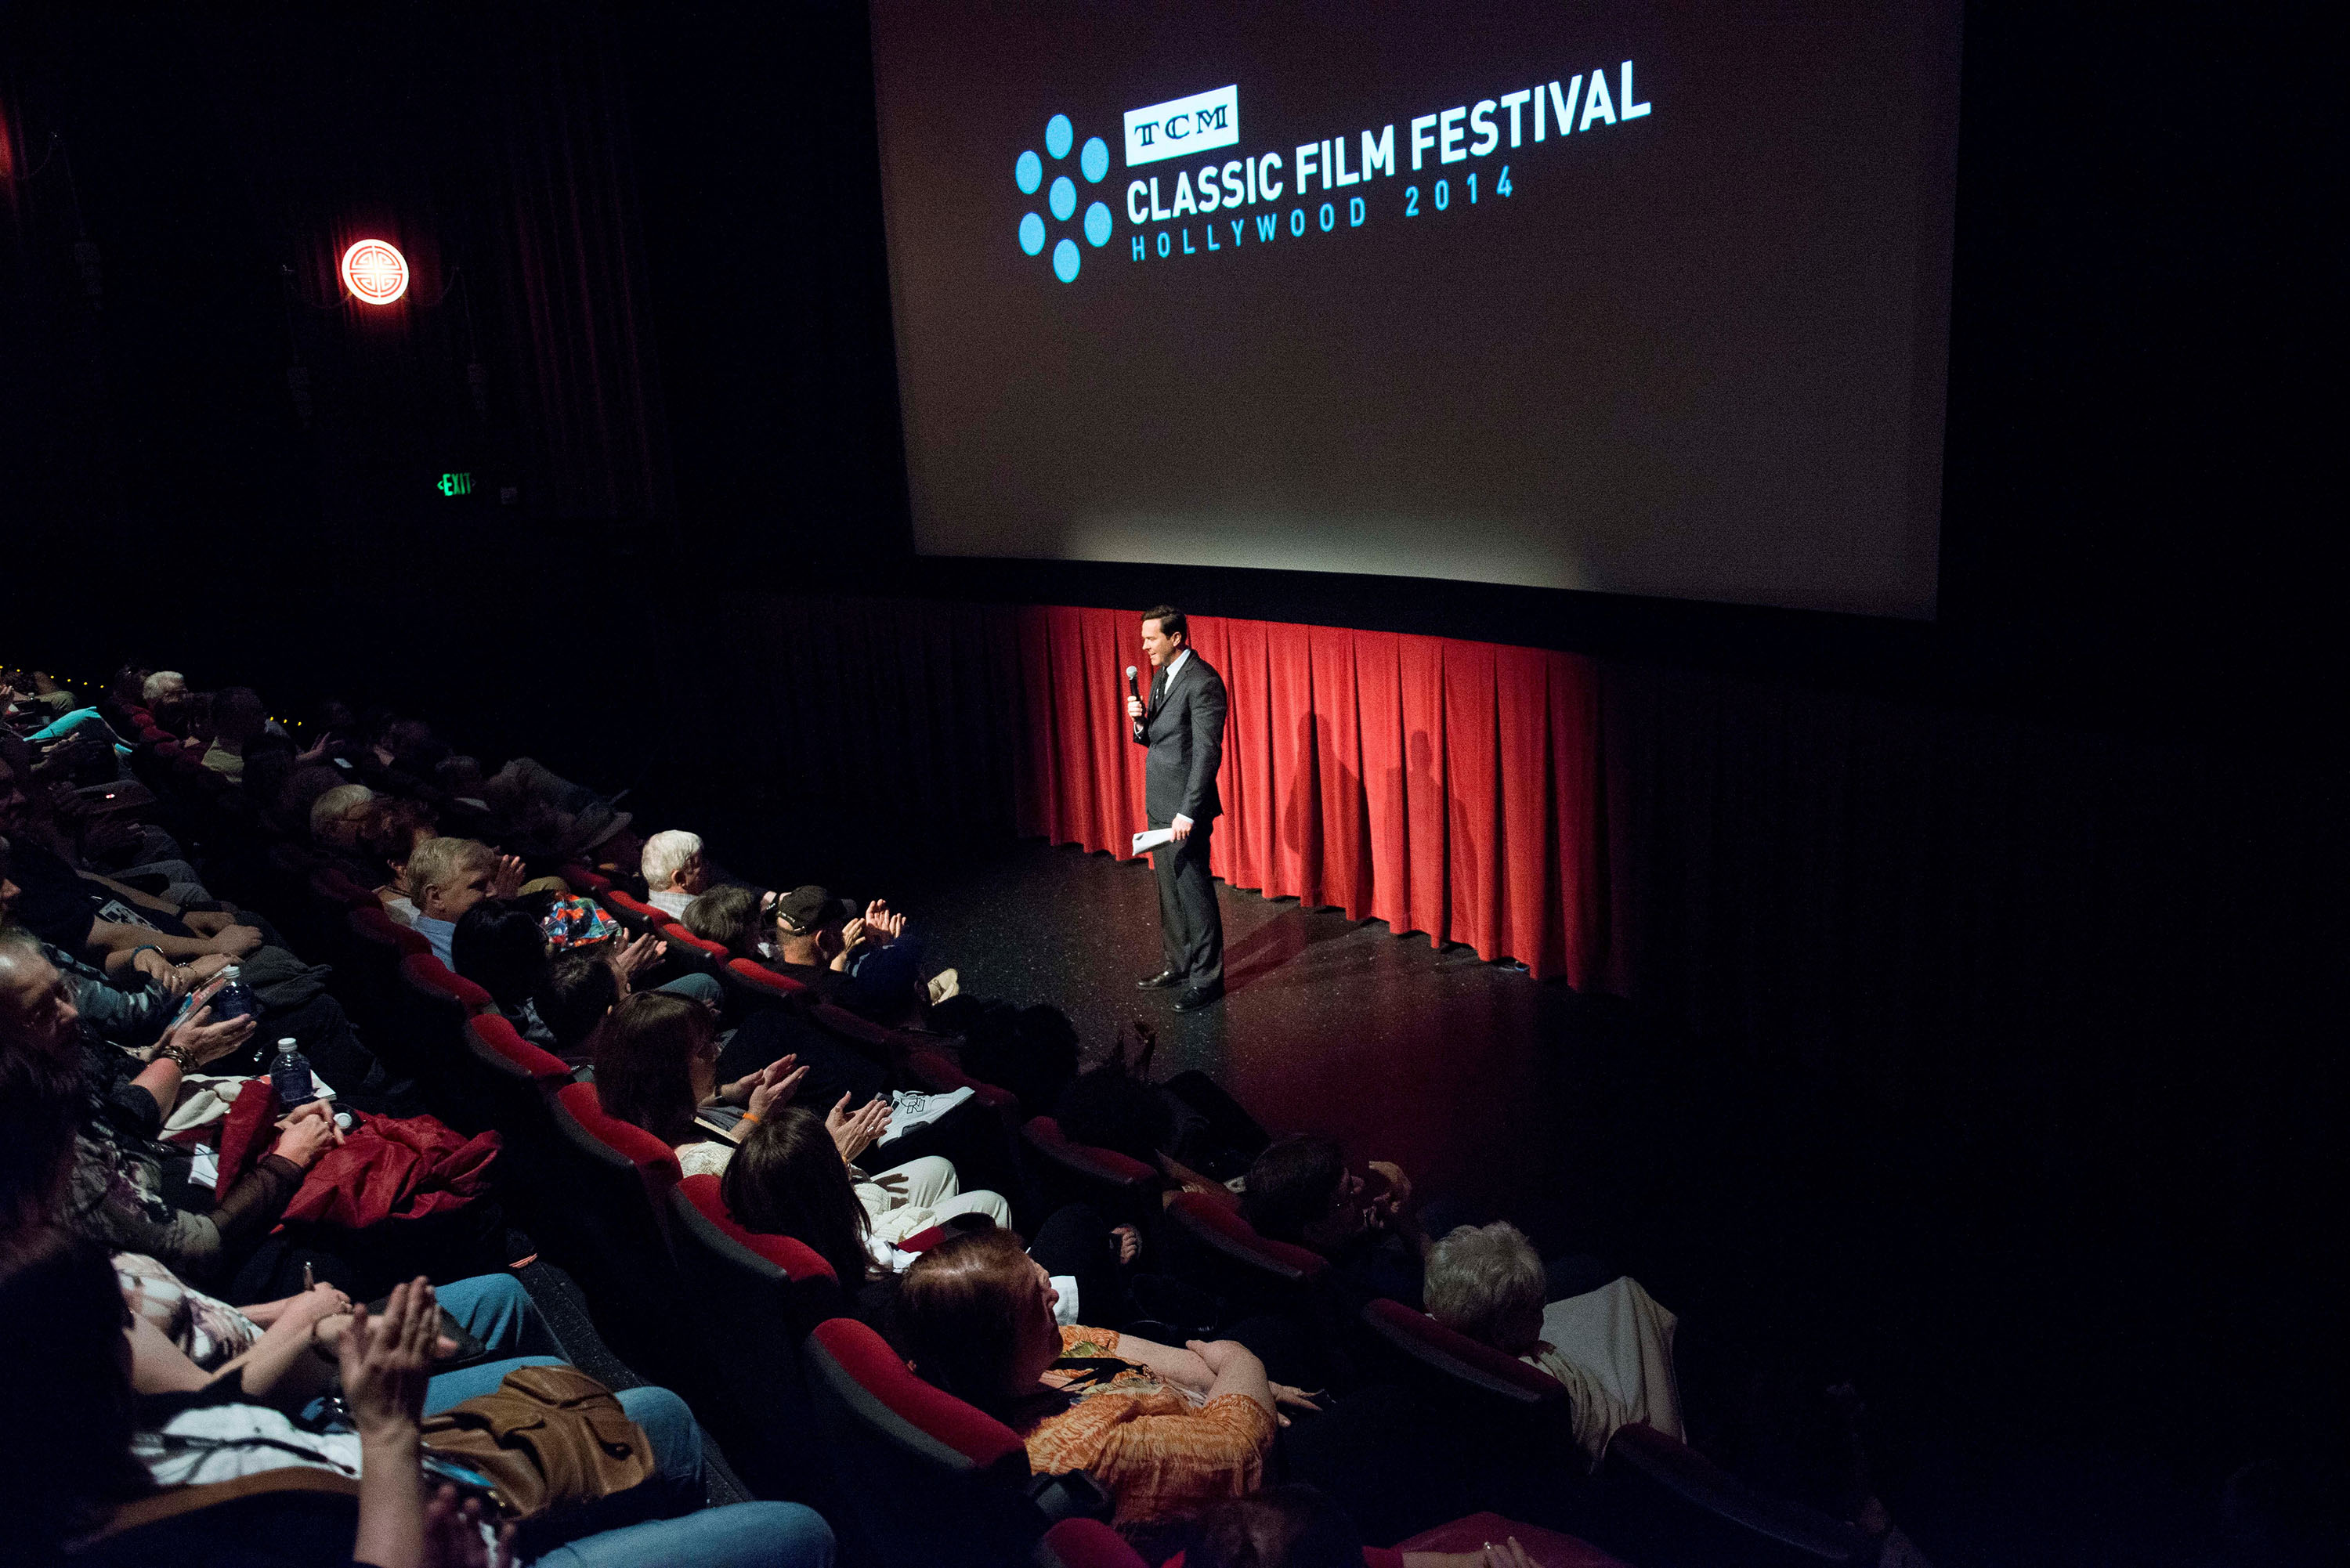 Jeffrey Vance introducing the first of two sold-out screenings of ON APPROVAL (1944) at the TCM Classic Film Festival, TCL Chinese Theatre, Hollywood, CA, April 10, 2014.